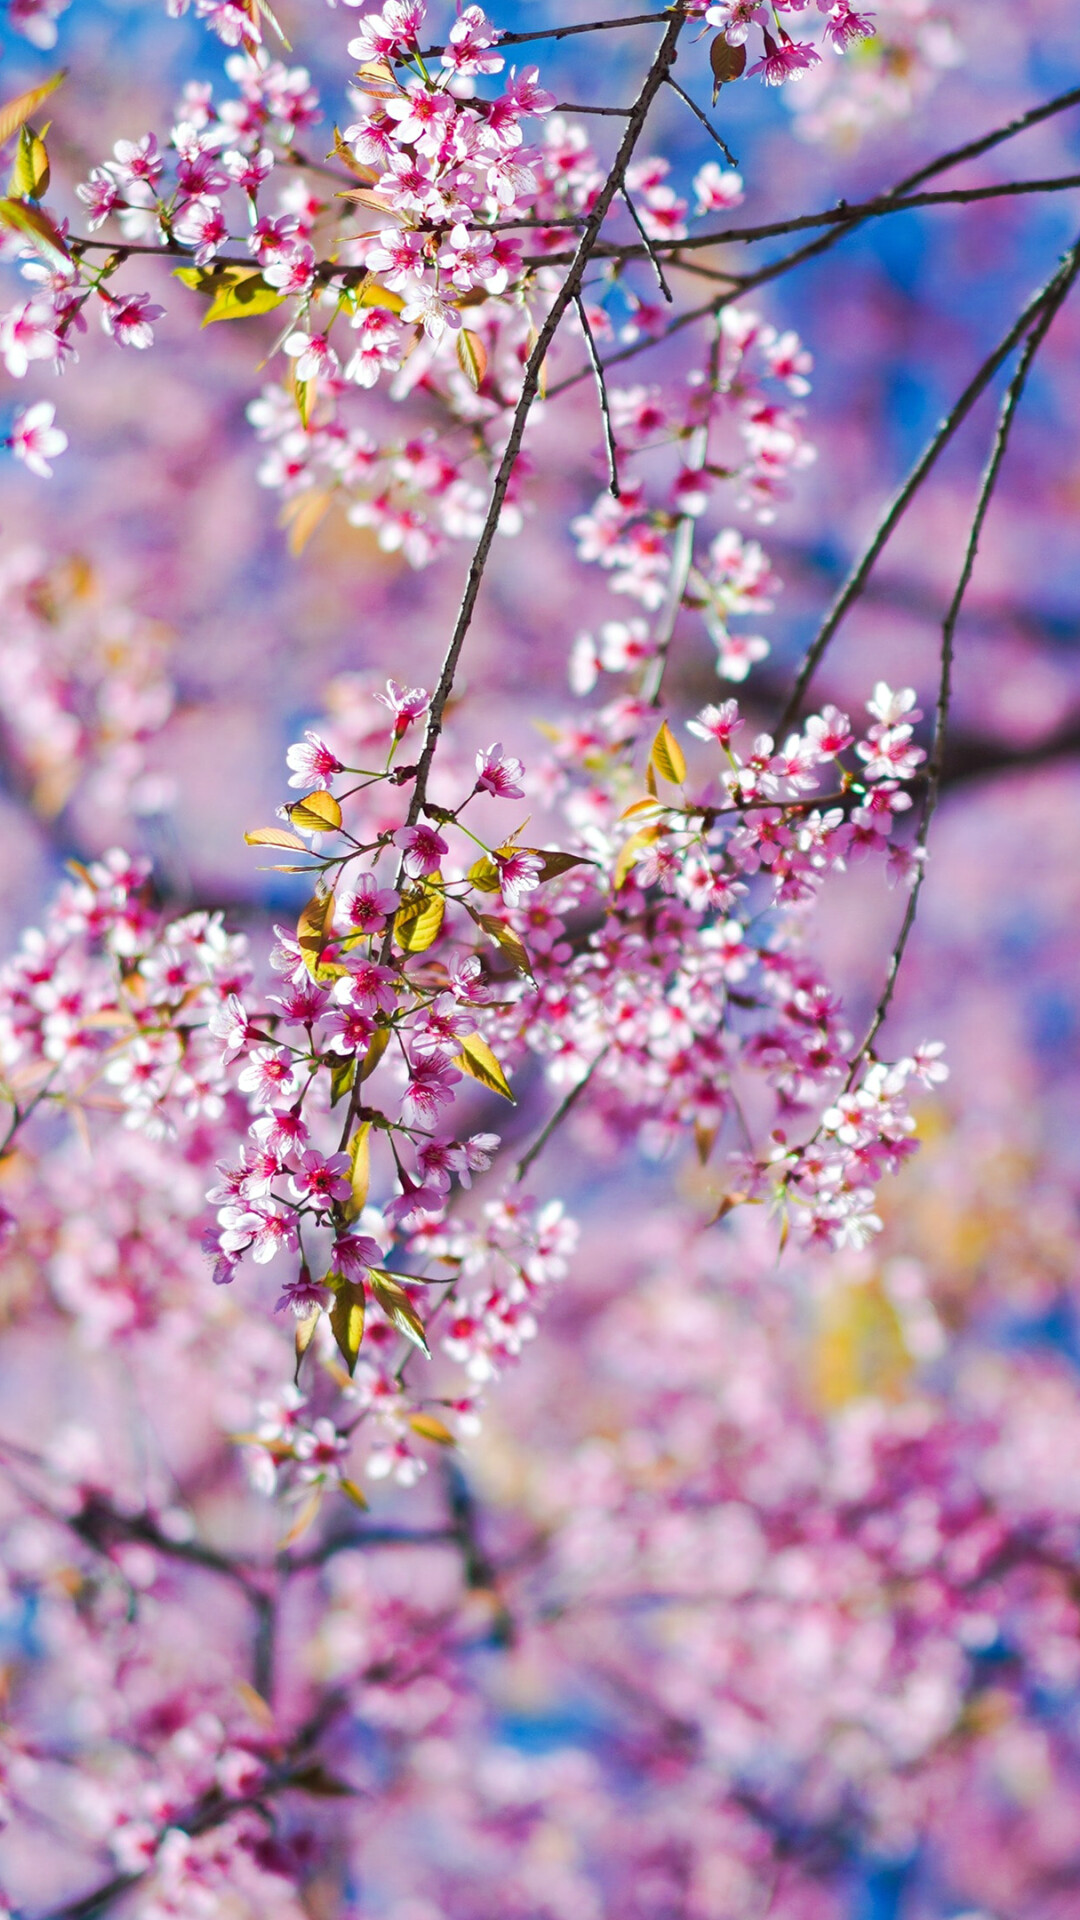 Spring: The season that is steeped in love and joy, Flowering plant. 1080x1920 Full HD Background.